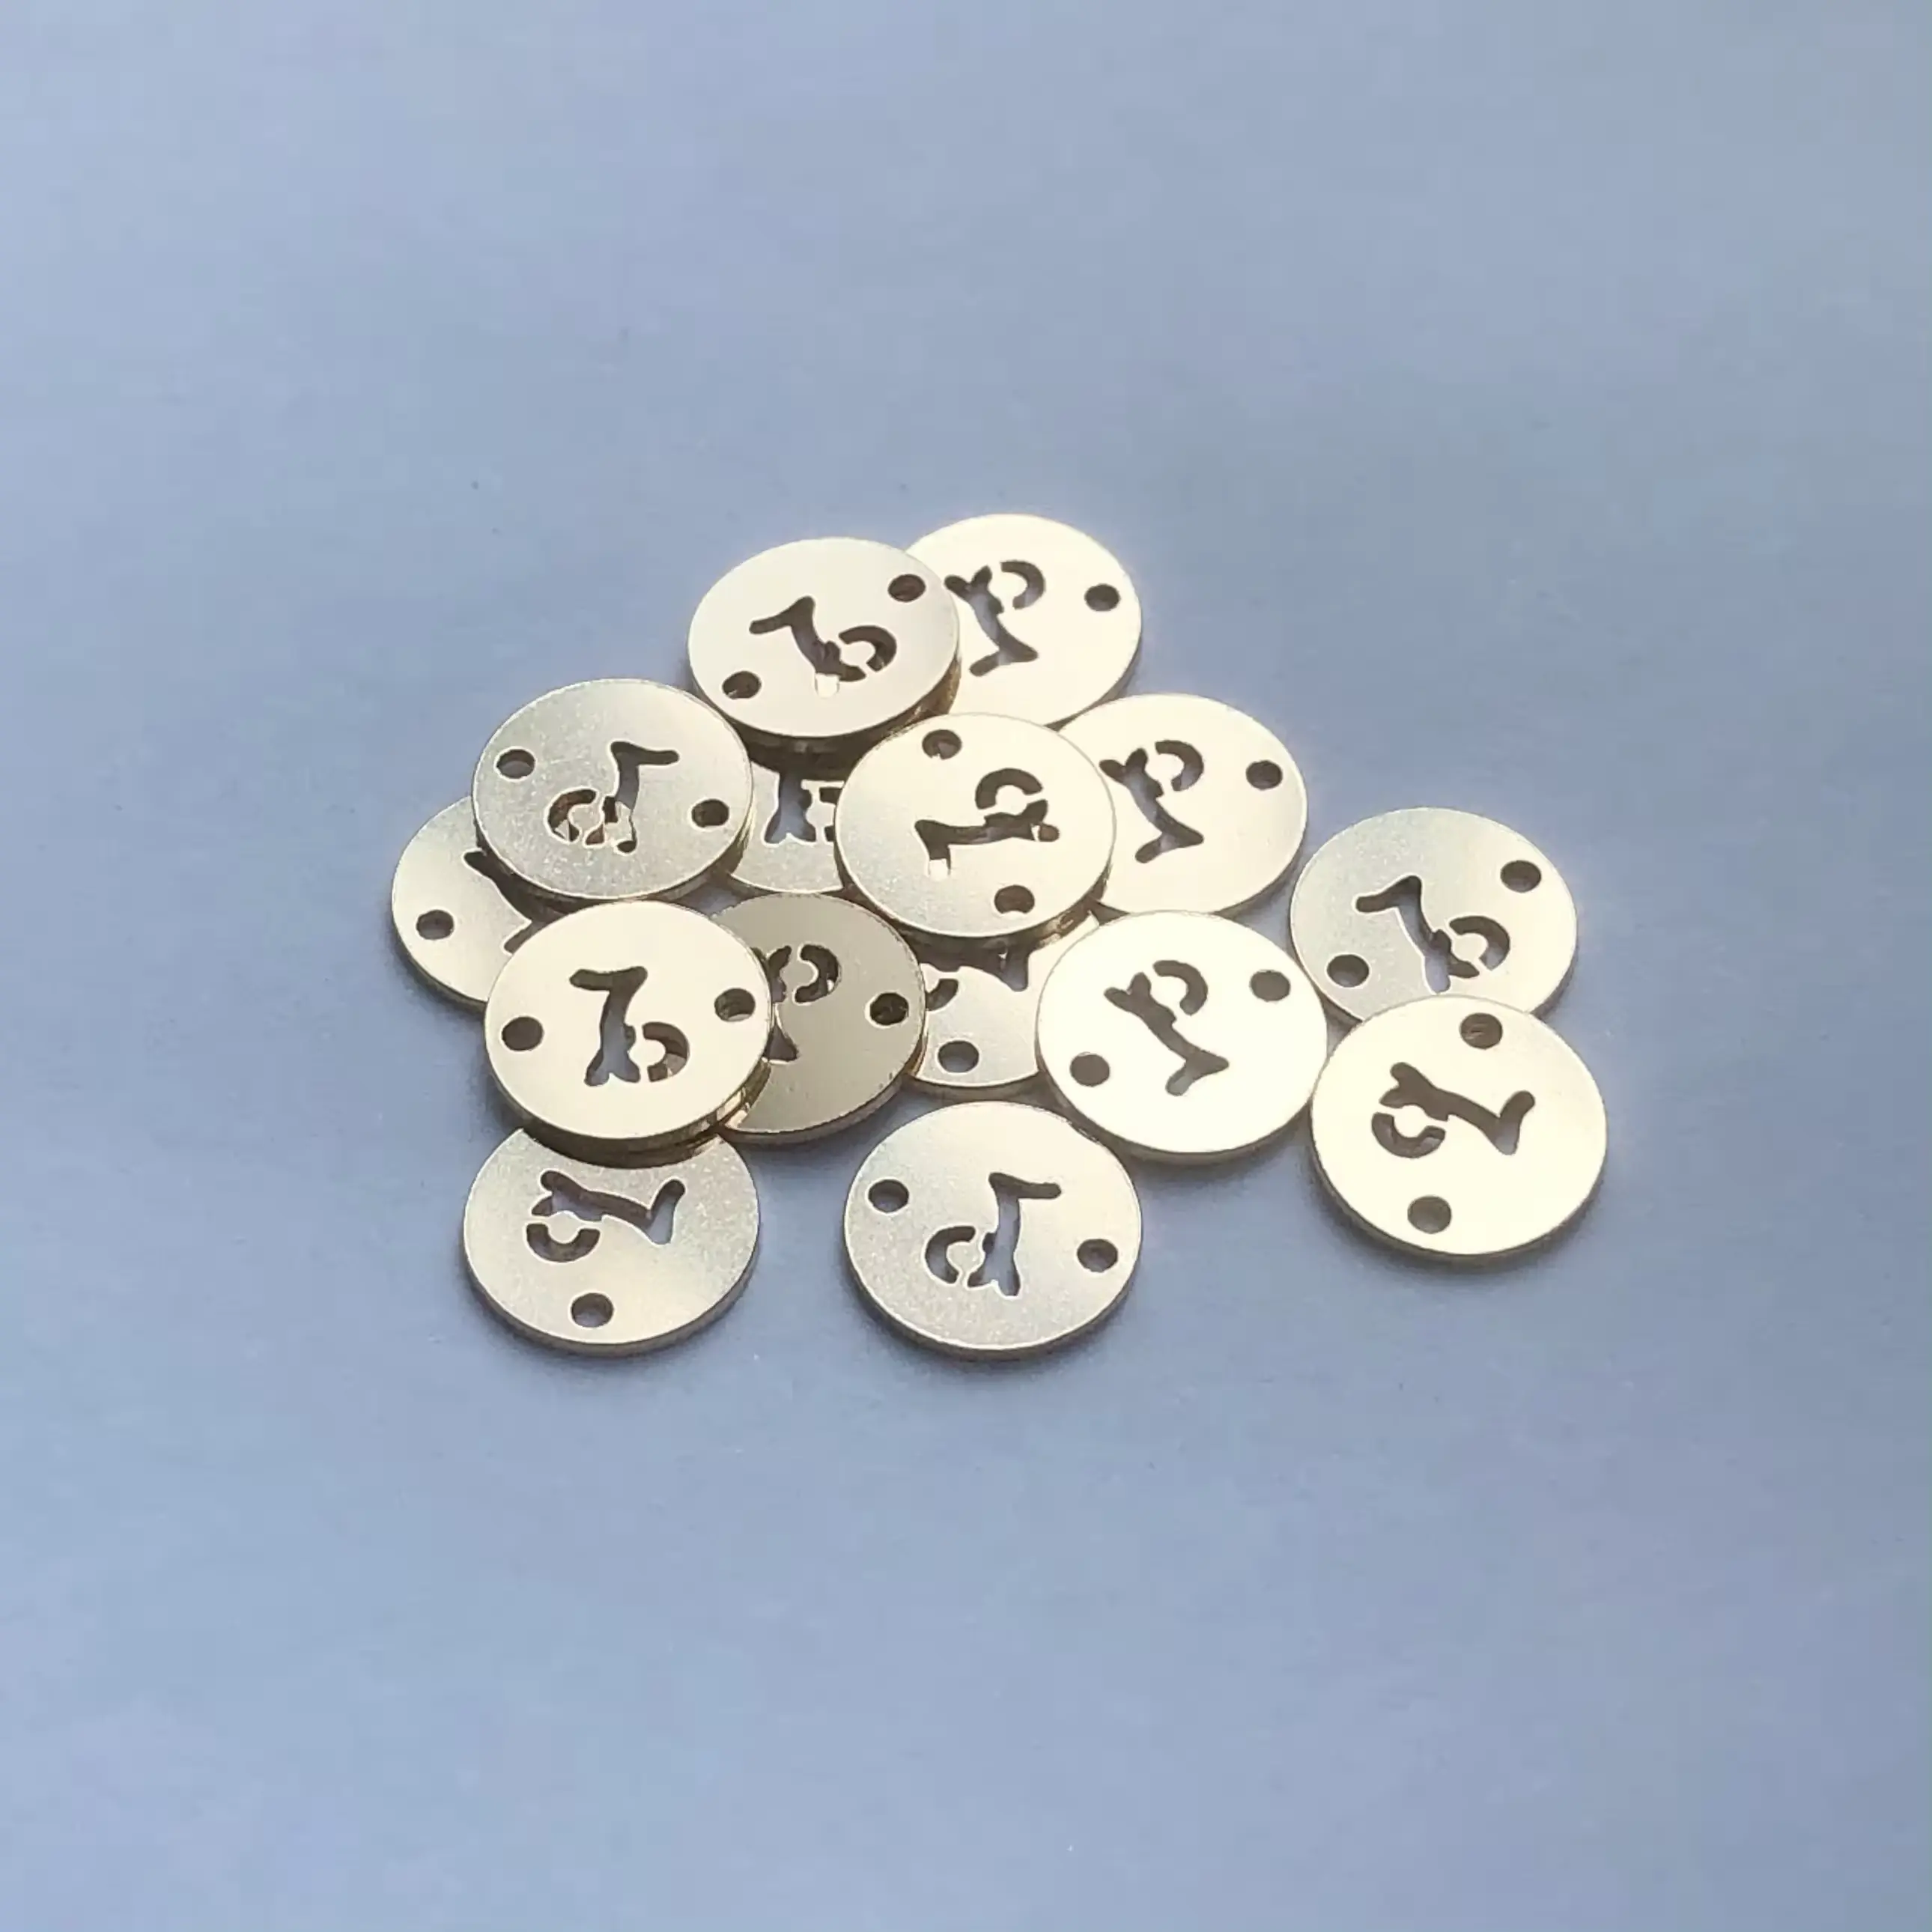 New Signs Of The Zodiac Pendant Connectors Jewelry Making Genuine Gold Filled Charms